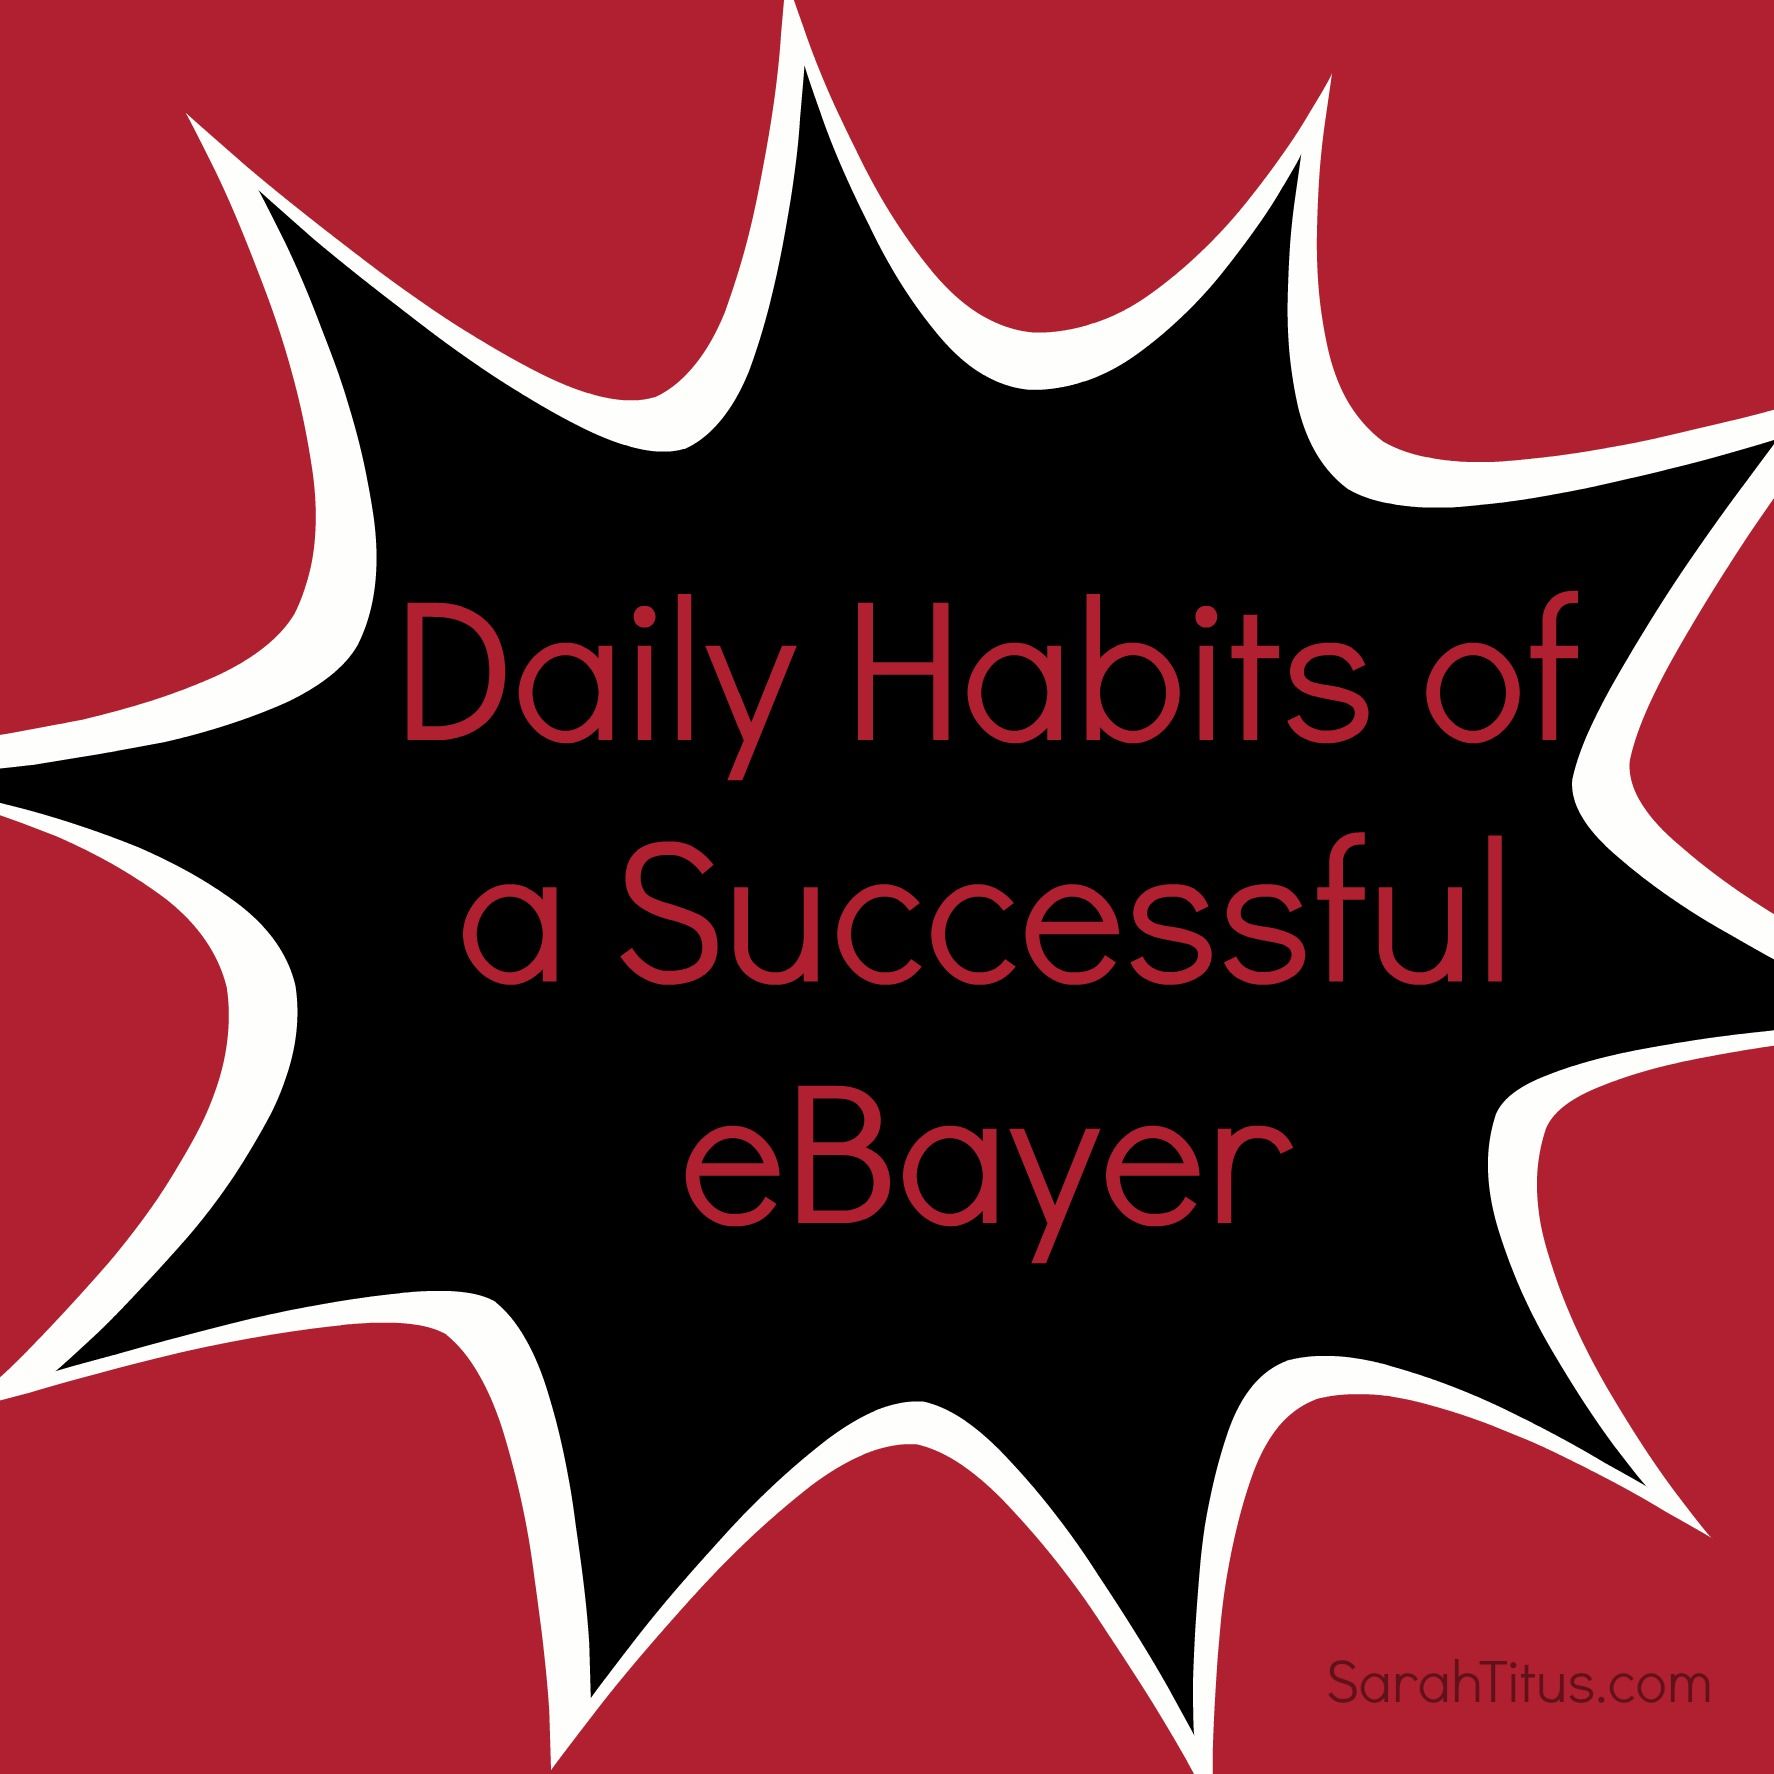 Download habits image for free